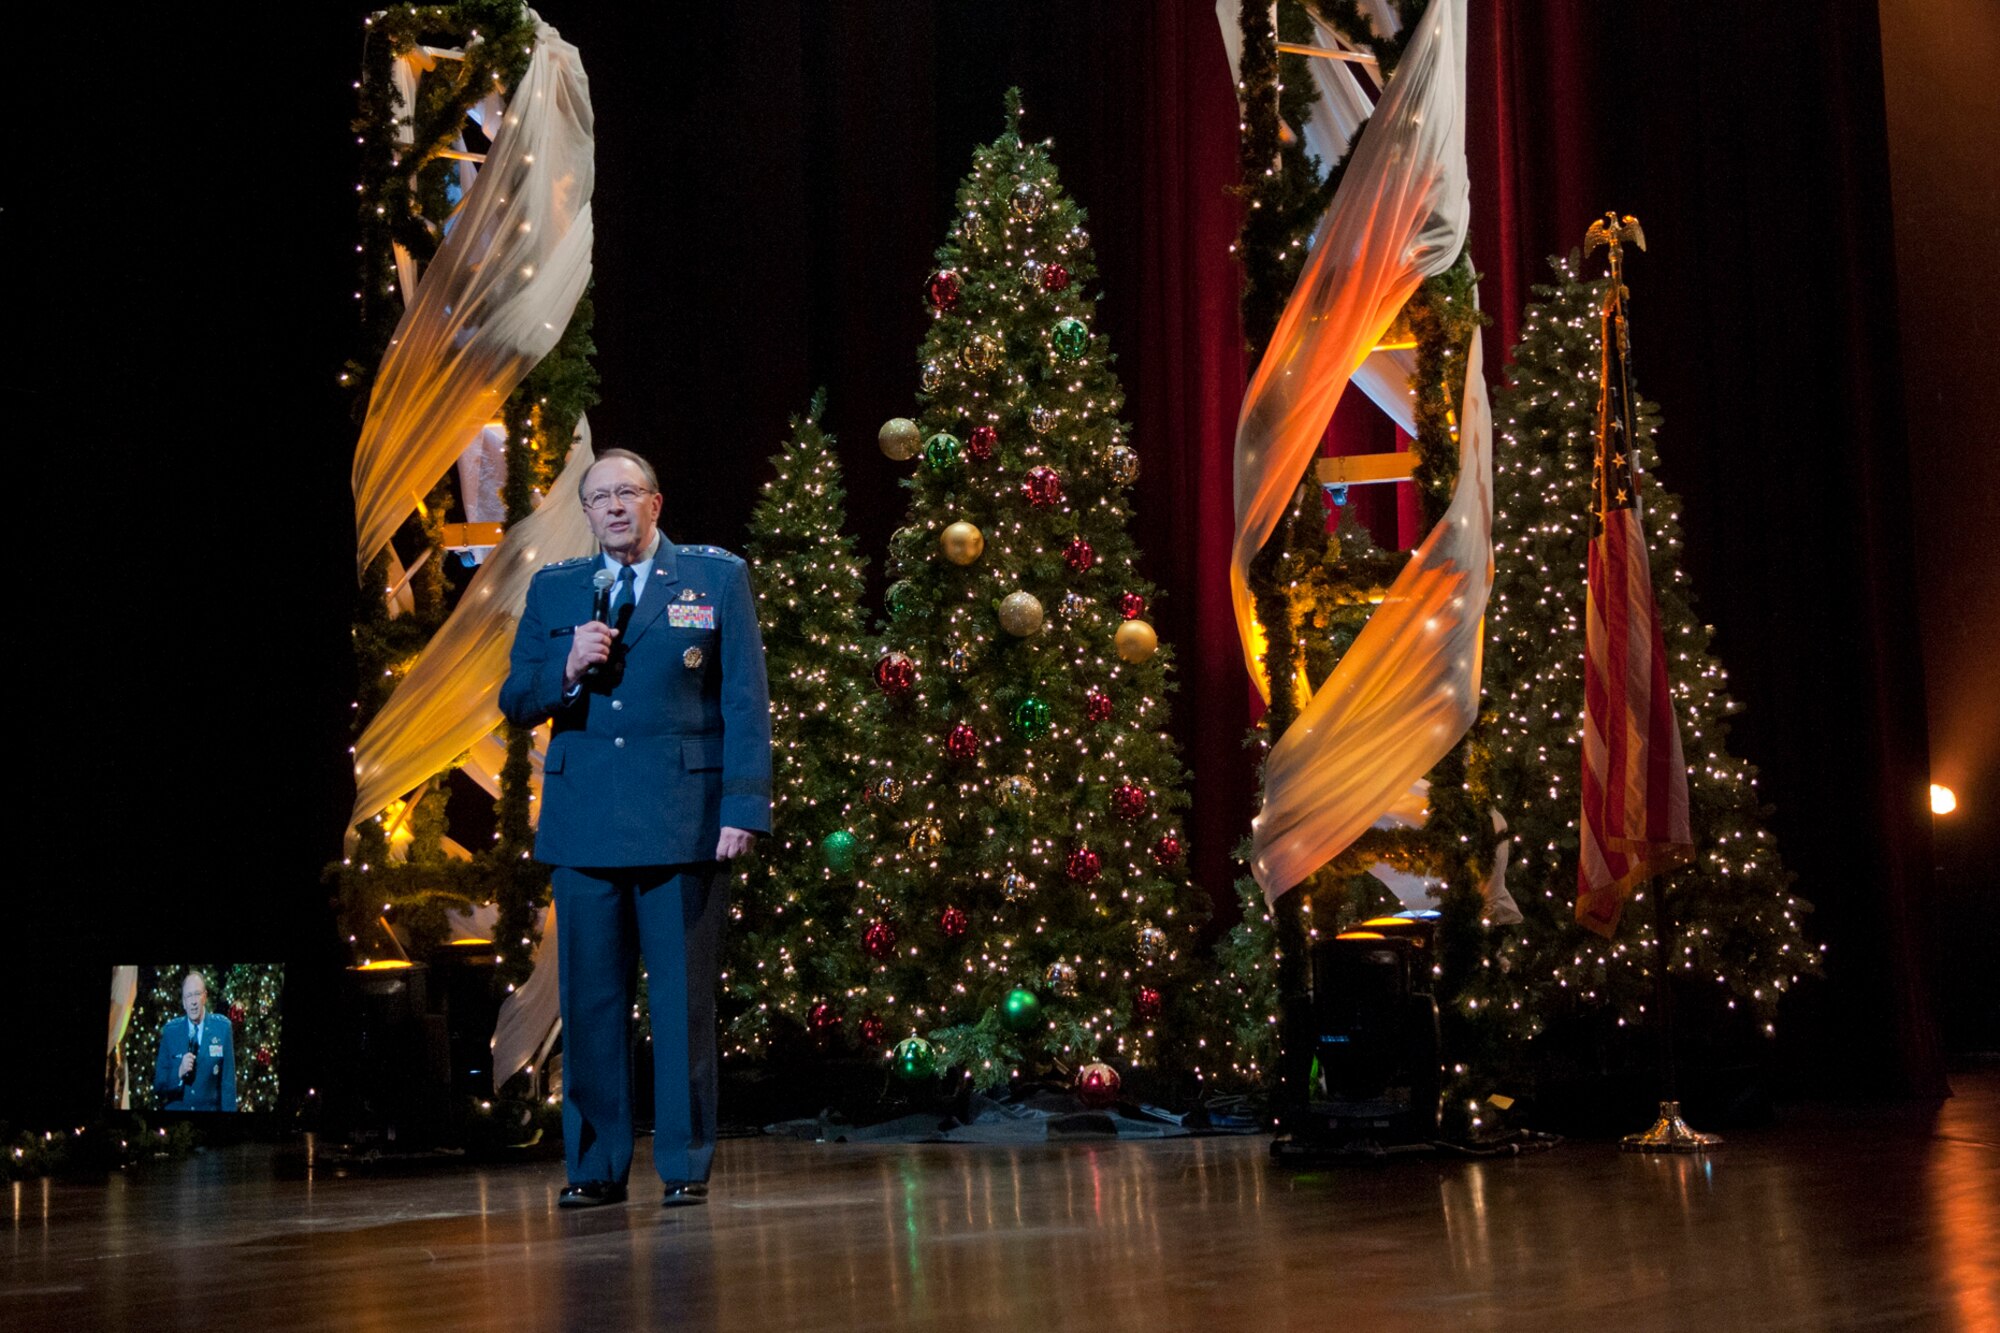 Lt. Gen. Charles E. Stenner, Jr., commander Air Force Reserve Command, makes remarks during the taping of "Holiday Notes from Home" at the Grand Ole Opry House, in Nashville, Tenn. The Band of the U.S. Air Force Reserve and the Air Force Strings joined Grammy winning vocalist Lee Ann Womack and Little Big Town to record the hour-long special that will air on the American Forces Network and the Great American Country Network this holiday season. (U.S. Air Force photo/Ken Hackman)